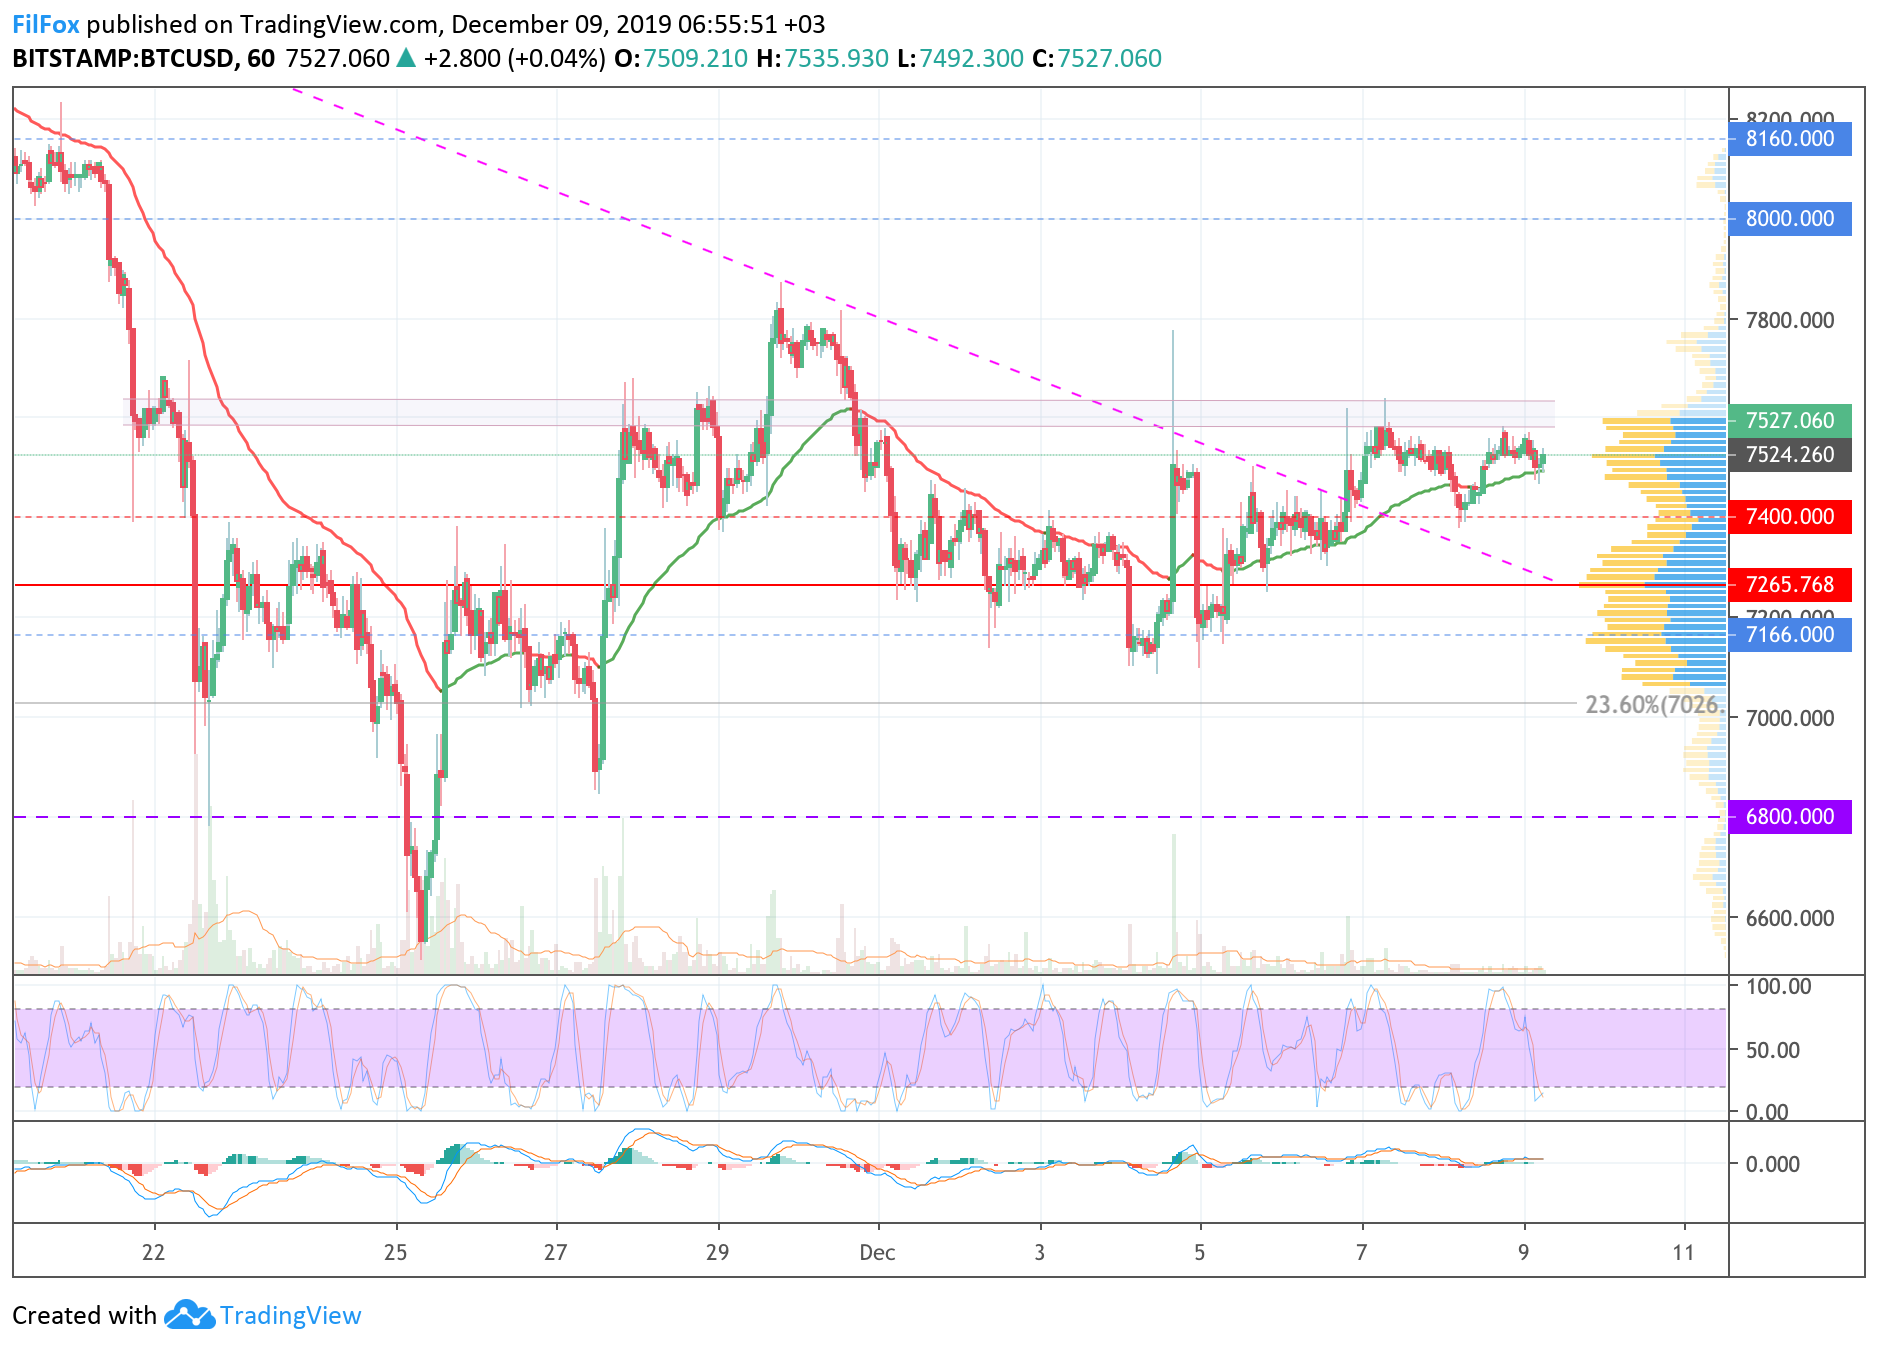 Analysis of cryptocurrency pairs BTC / USD, ETH / USD and XRP / USD on 12/9/2019